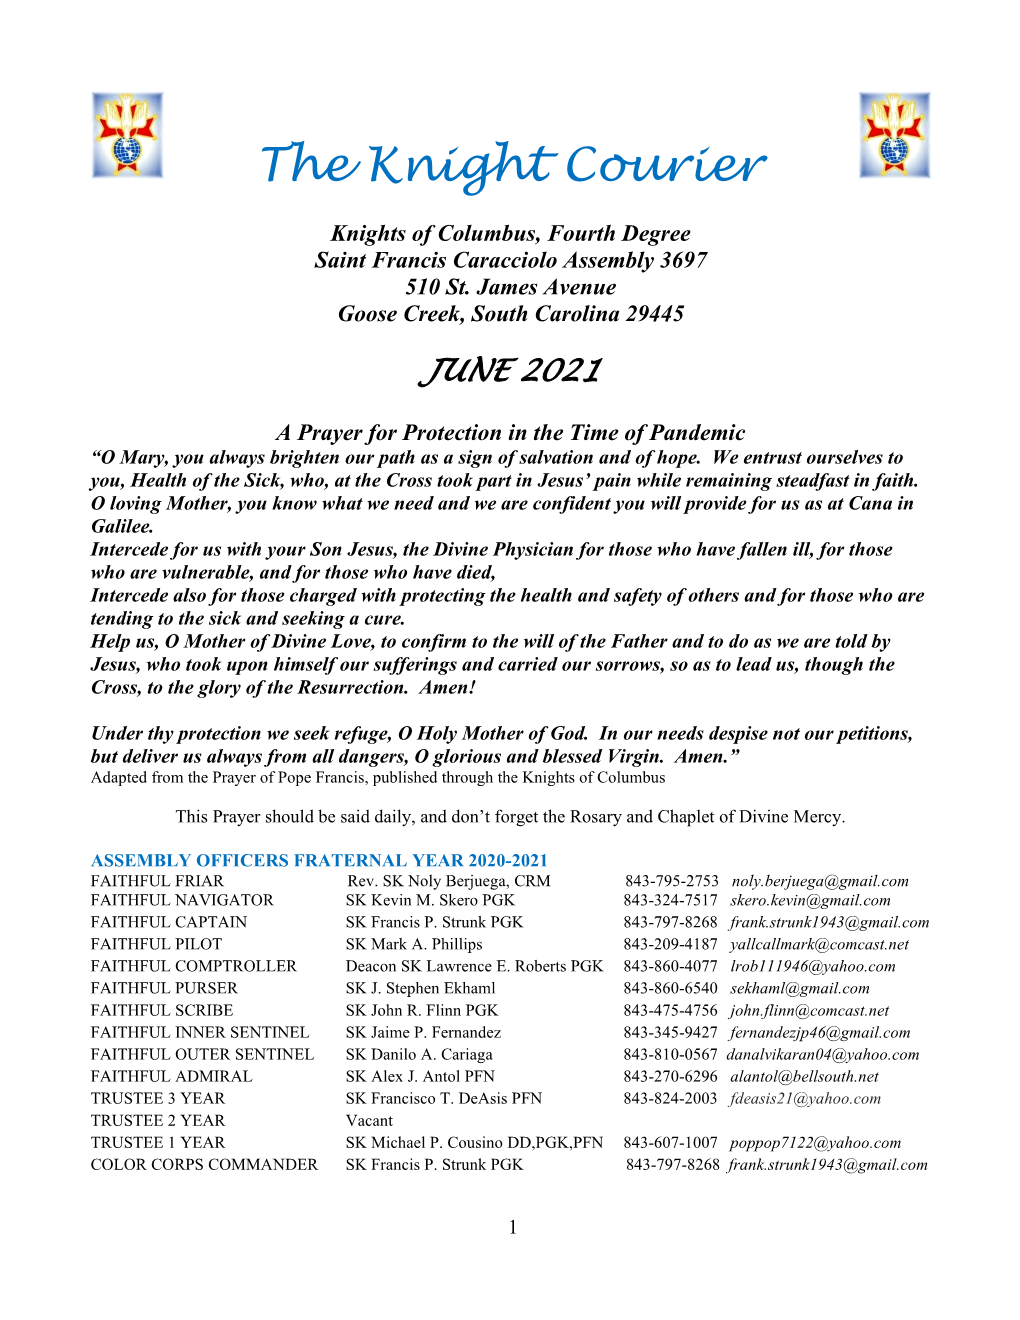 The Knight Courier